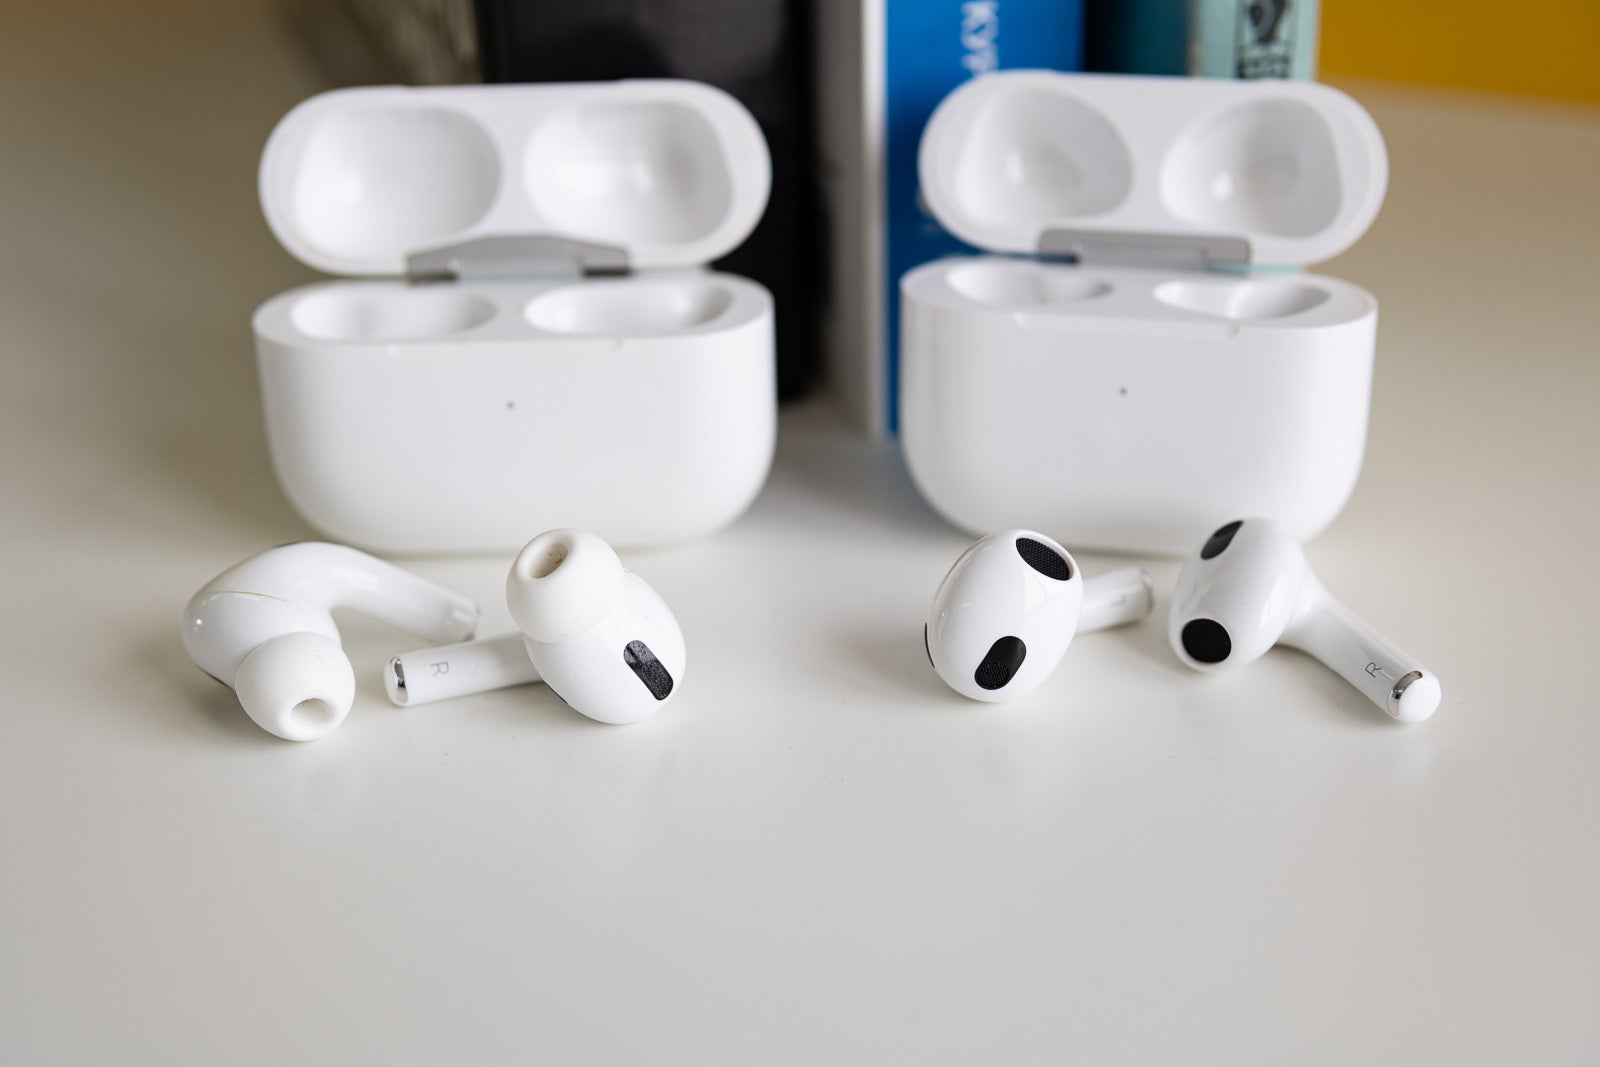 AirPods Pro (left) and AirPods 3 (right) - AirPods 3 vs AirPods Pro: Do you want ANC or not?